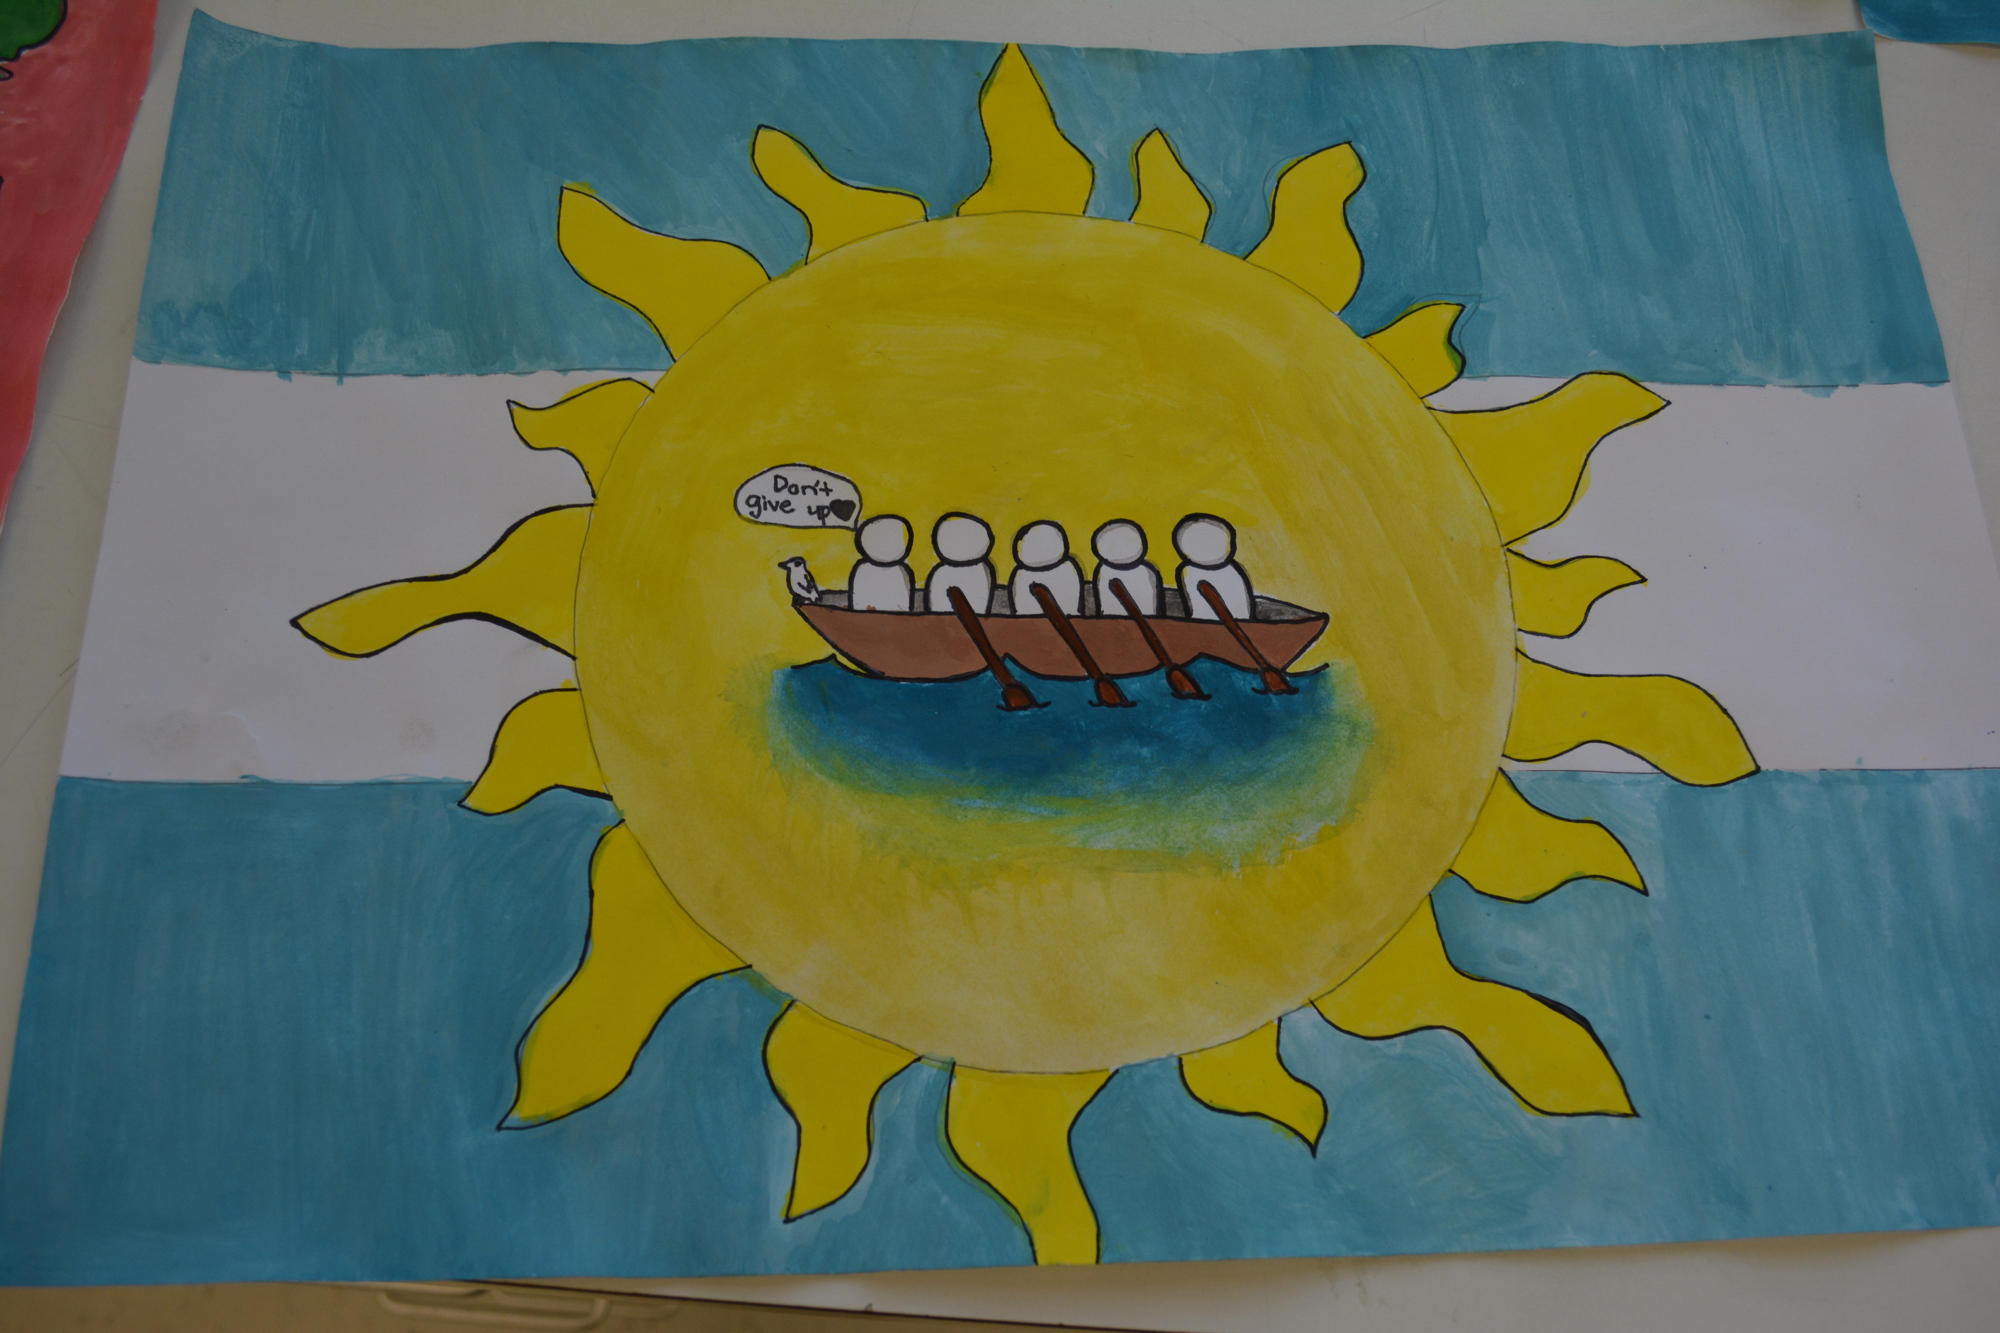 Other sixth-grade students at Braden River Middle School produced some exceptional art during the project.